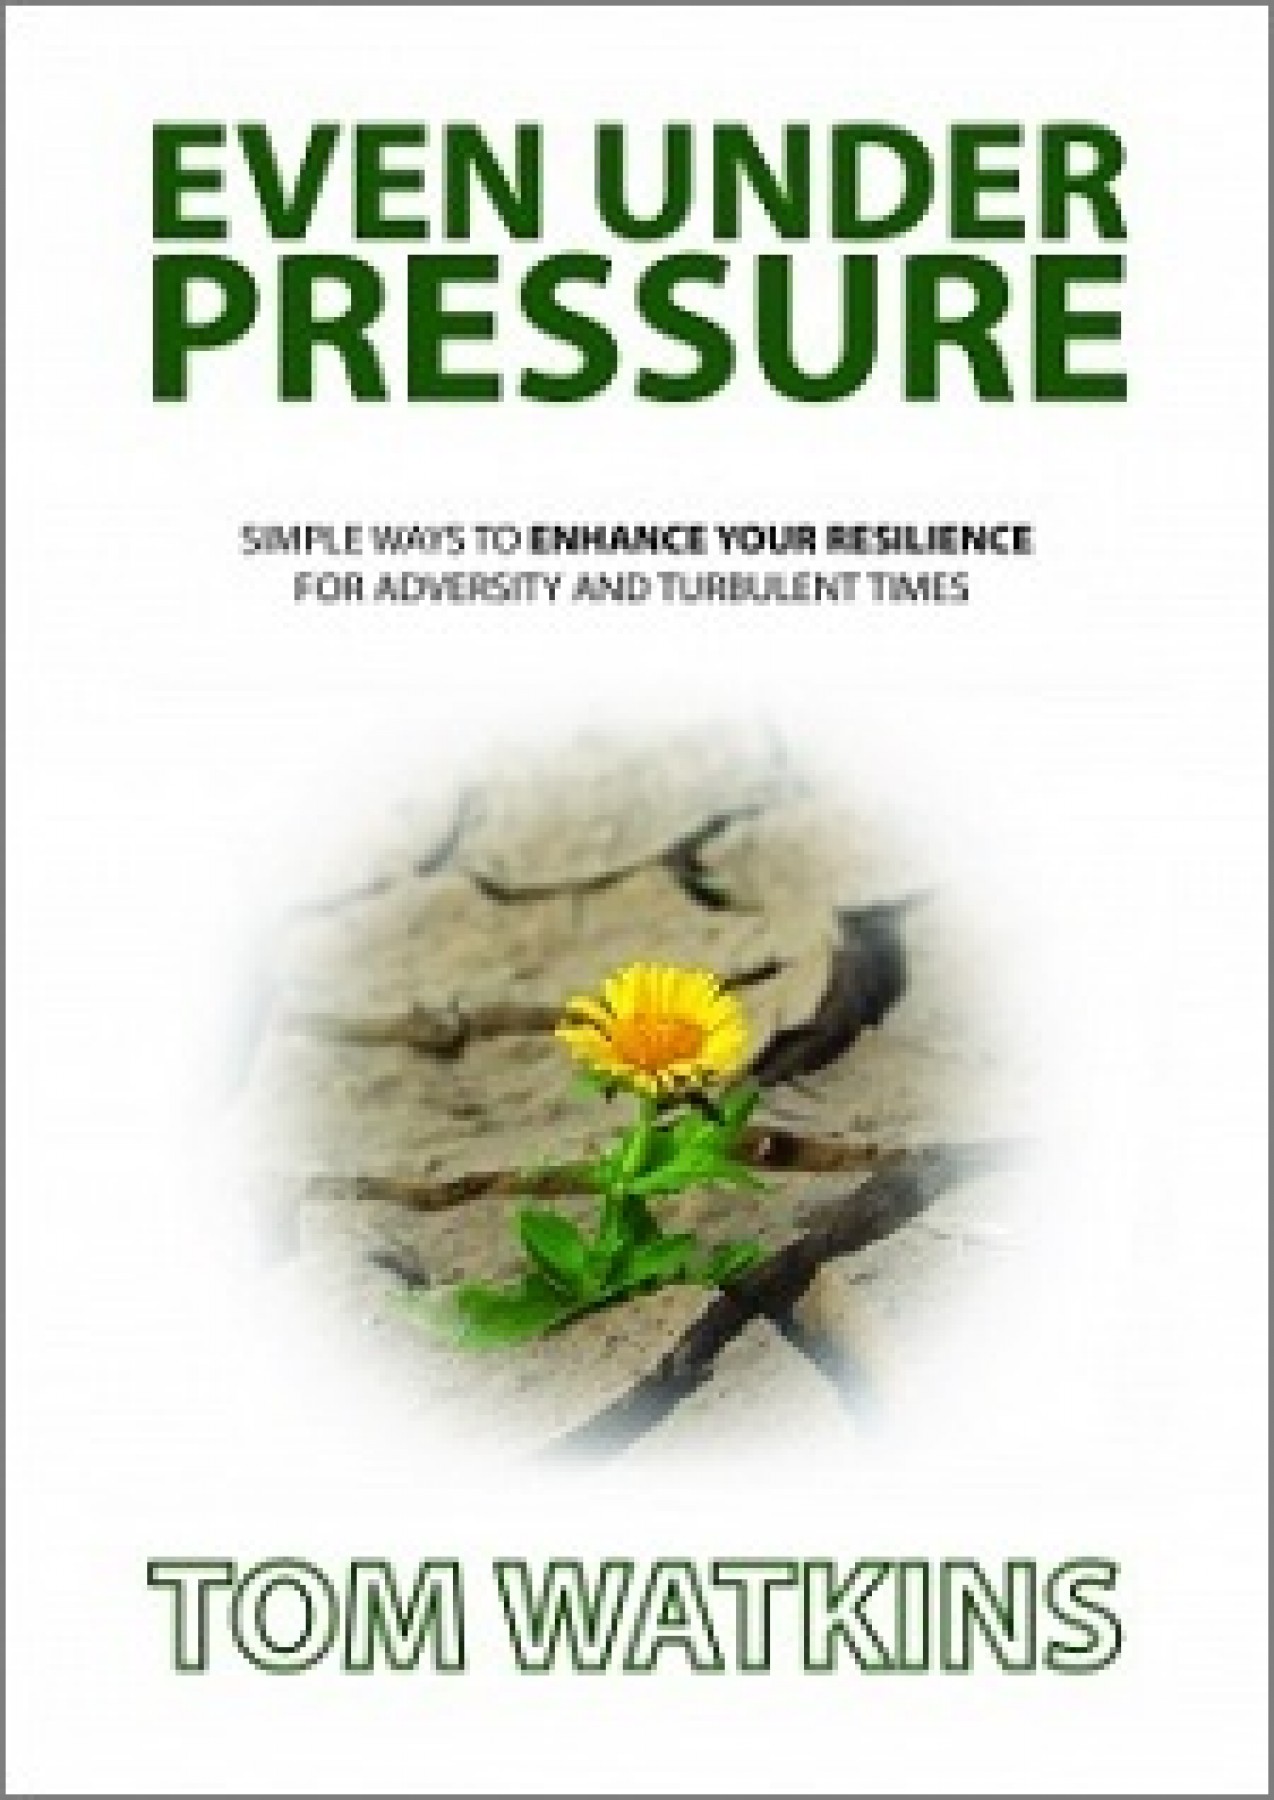 Even under pressure: Simple ways to enhance your resilience for adversity and turbulent times